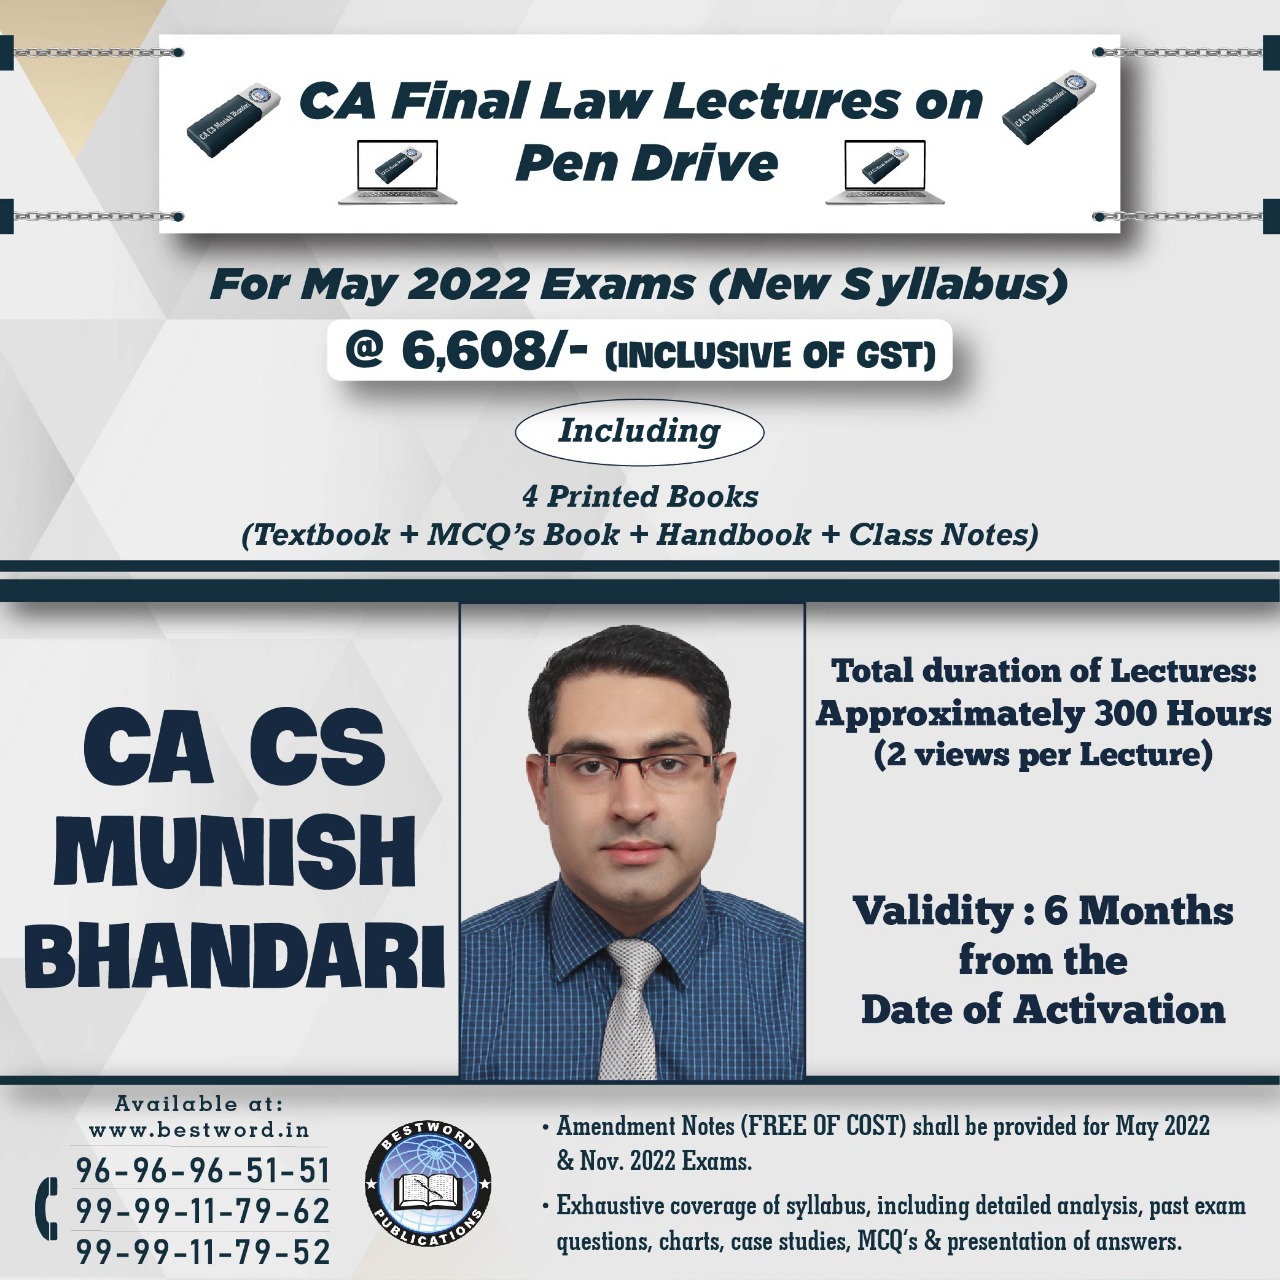 pen-drive-lectures-for-ca-final-law-–-by-ca-cs-munish-bhandari---for-may-2022-(corporate-and-economic-laws---new-syllabus)